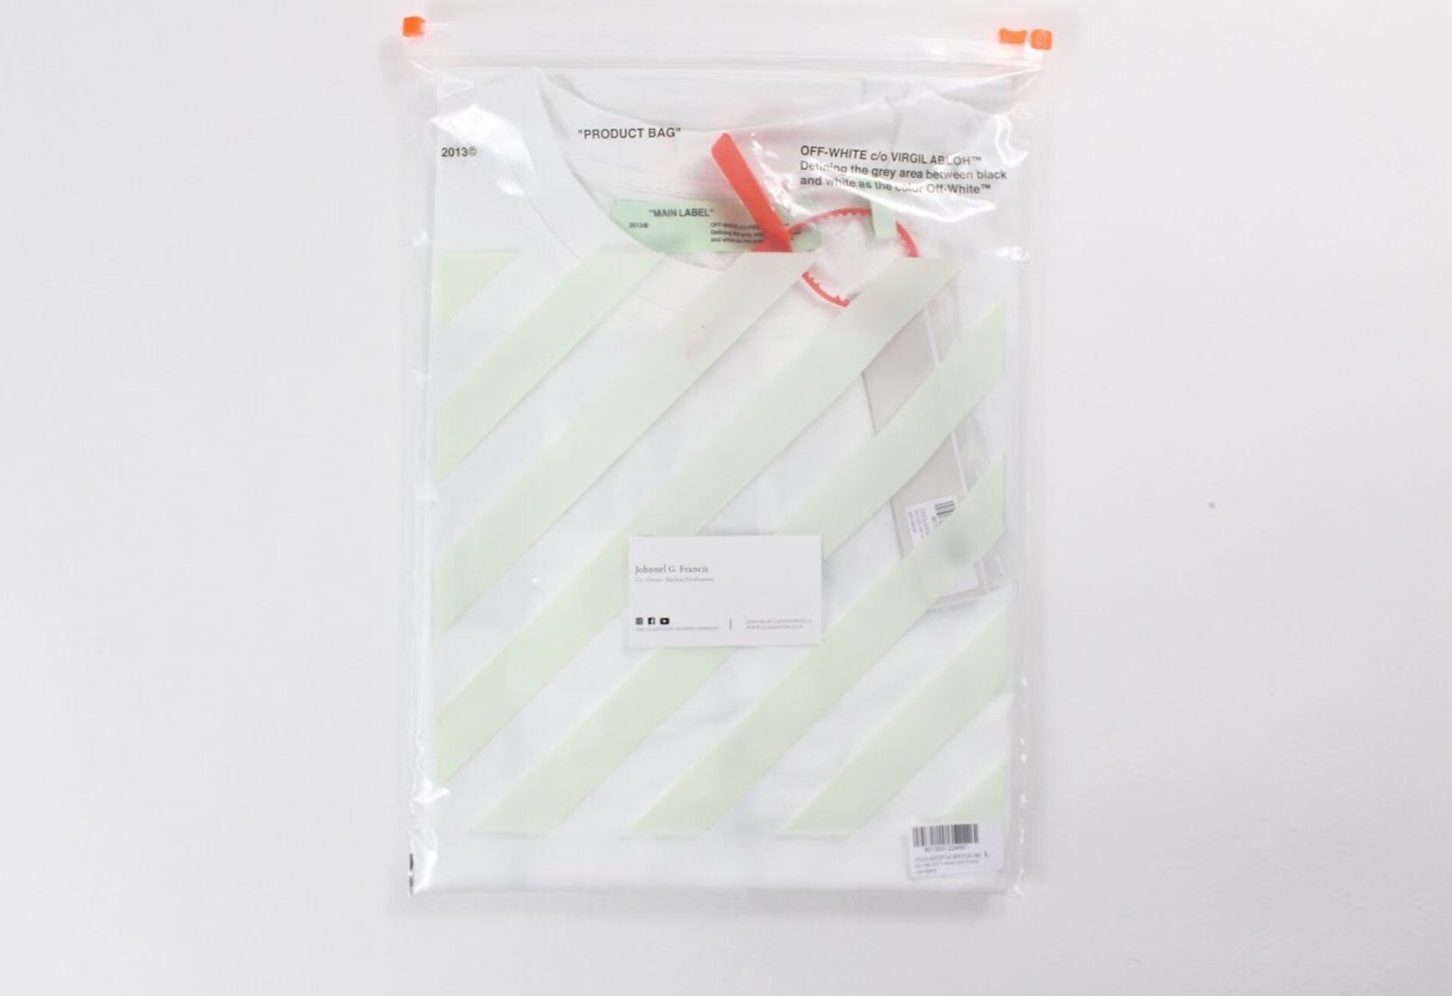 Off-White is Still Fighting for a Trademark Registration for Product Bag  - The Fashion Law